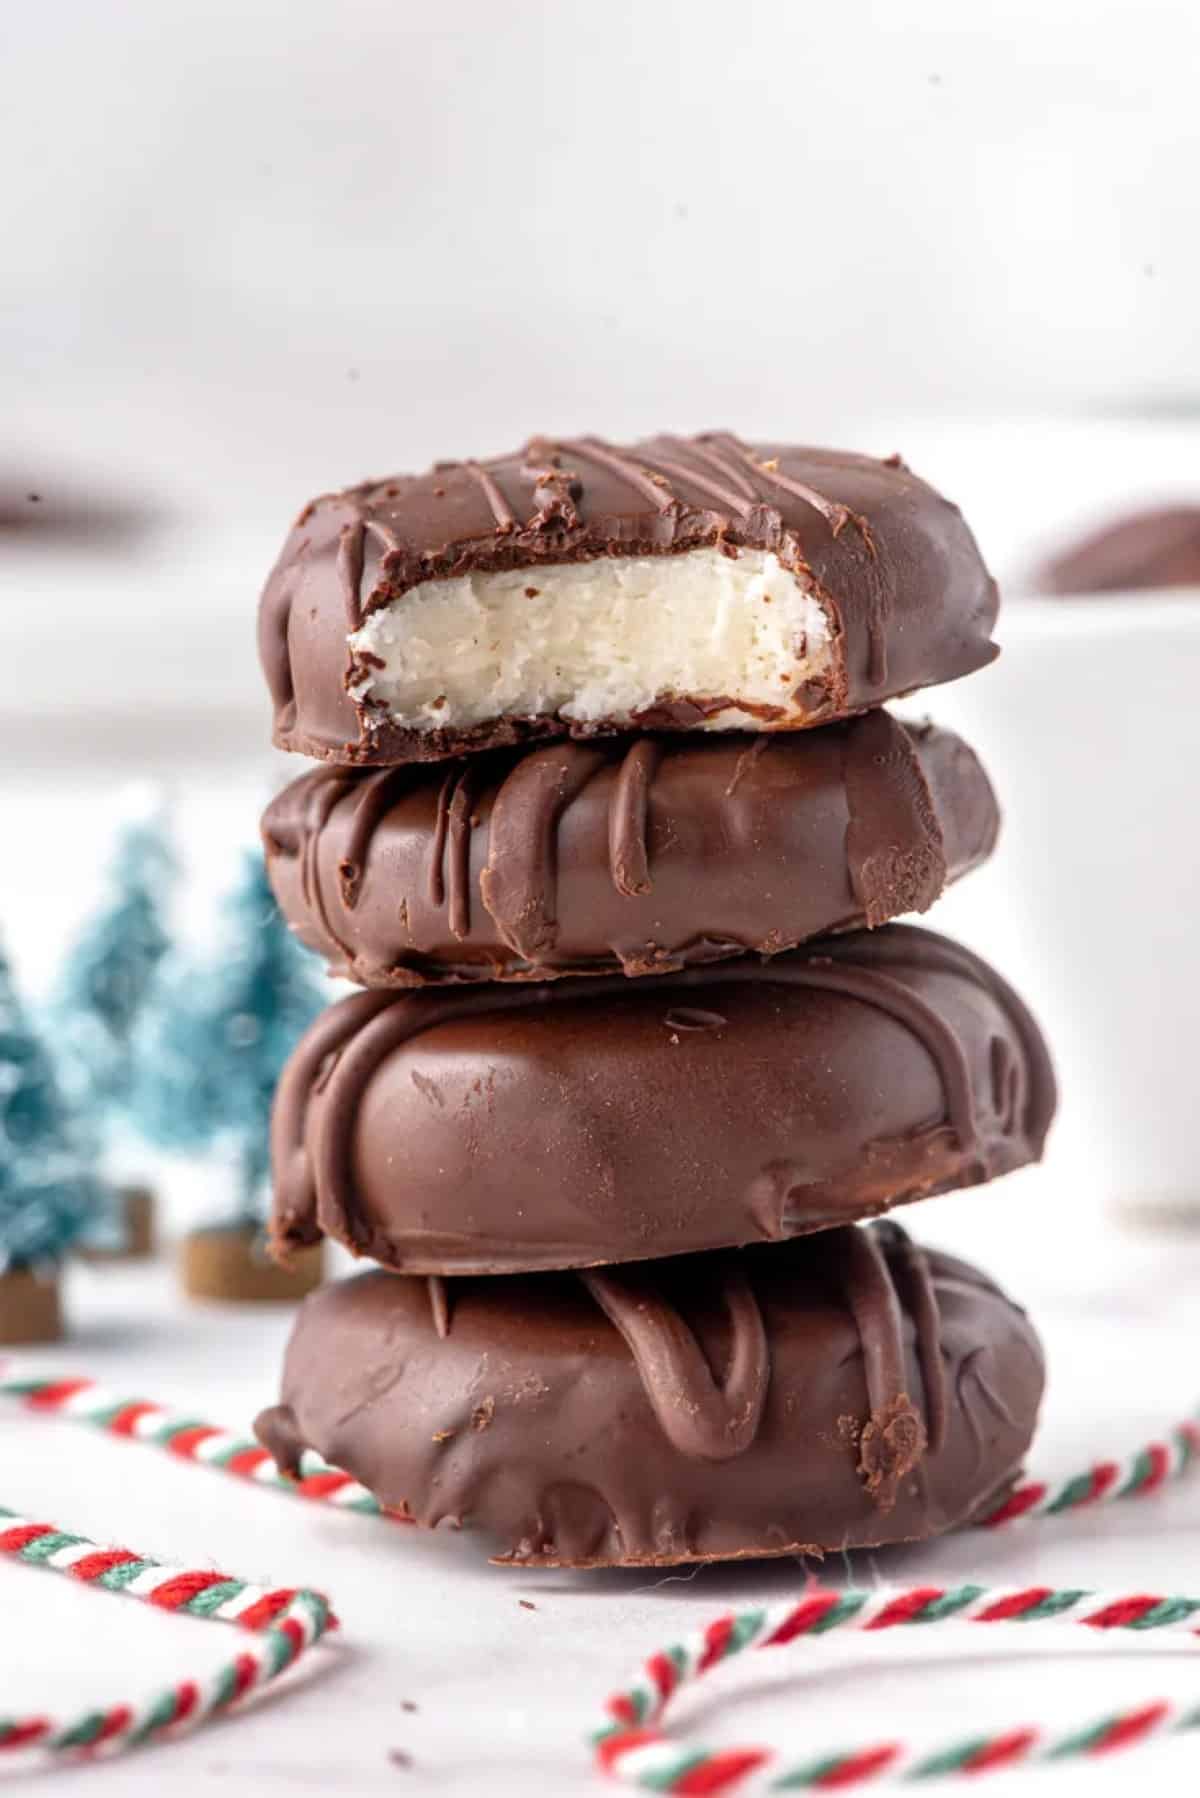 Peppermint Patty Candy stacked on top of one another with a bite taken out of the top patty.